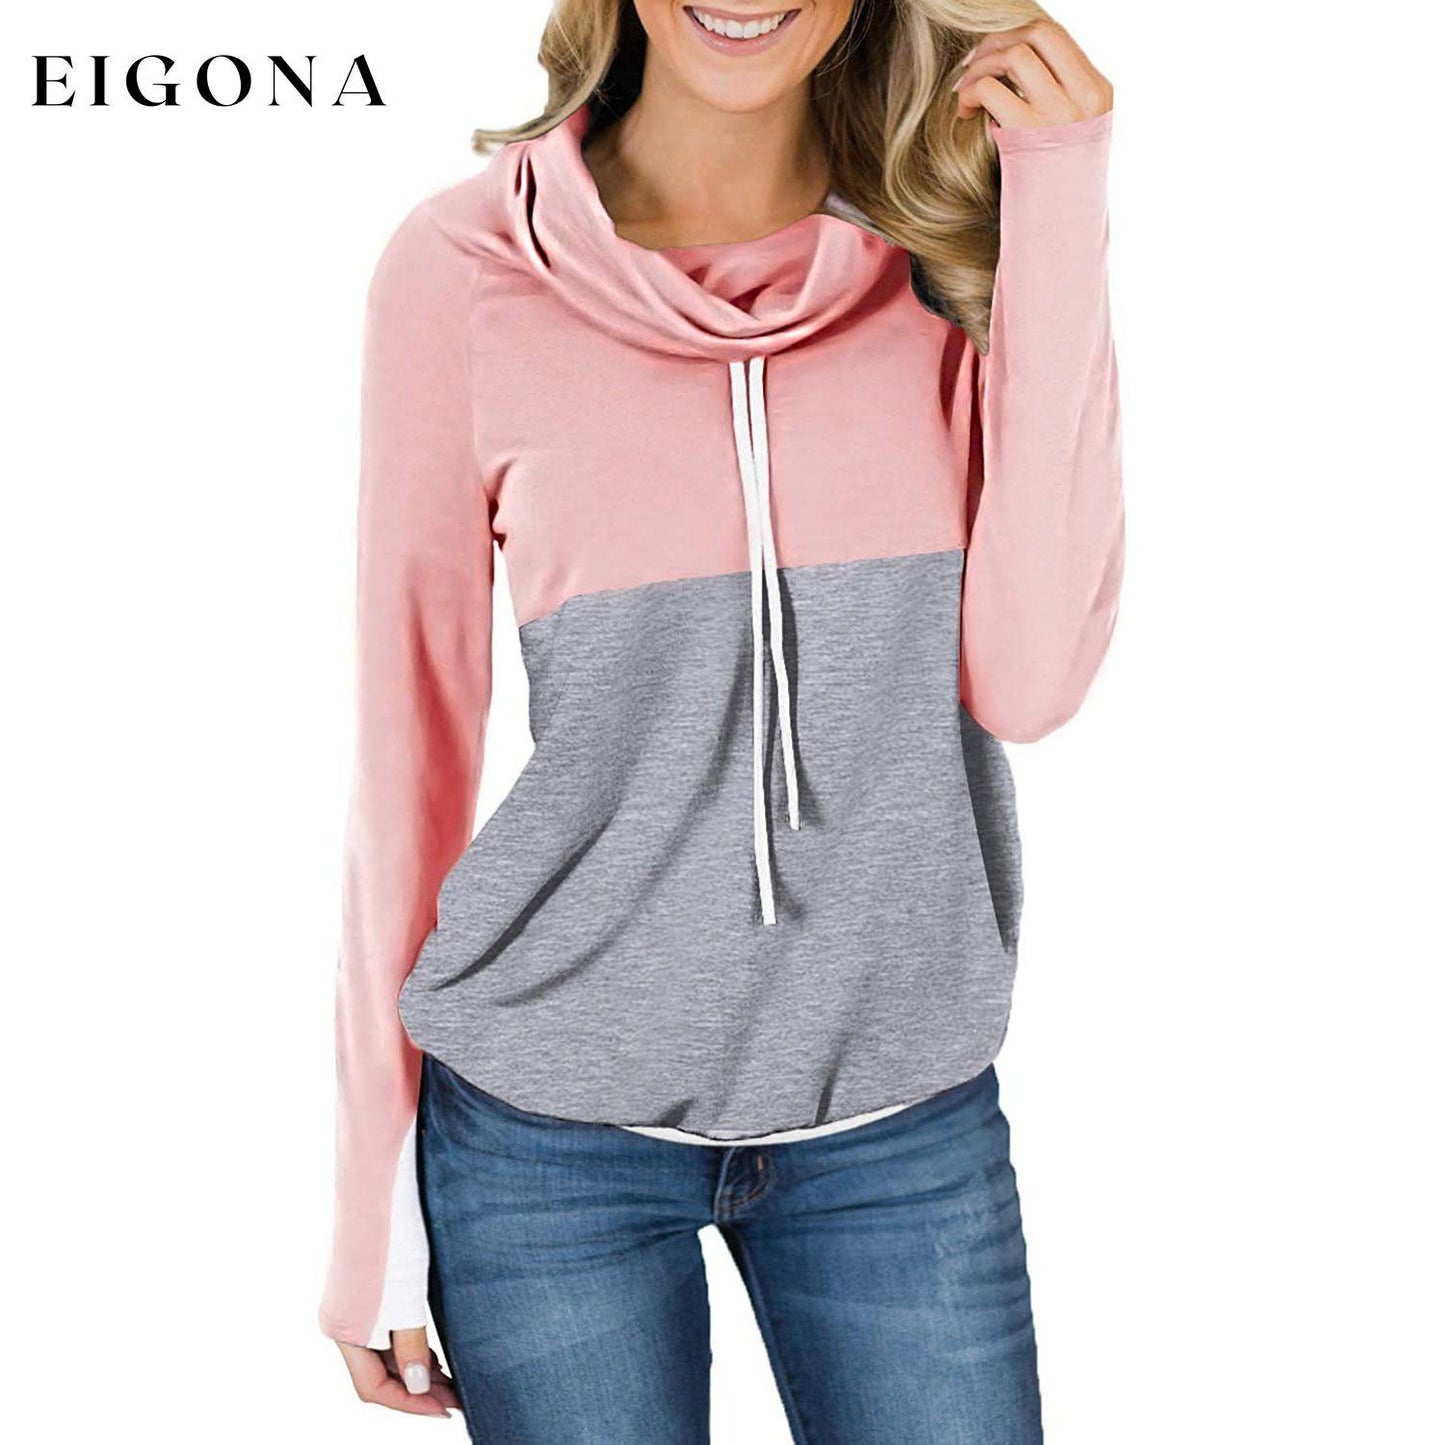 Women Cowl Neck Casual Tunic Sweatshirts Drawstring Long Sleeve Color Block Patchwork Pullover Tops Pink __stock:50 clothes refund_fee:1200 tops